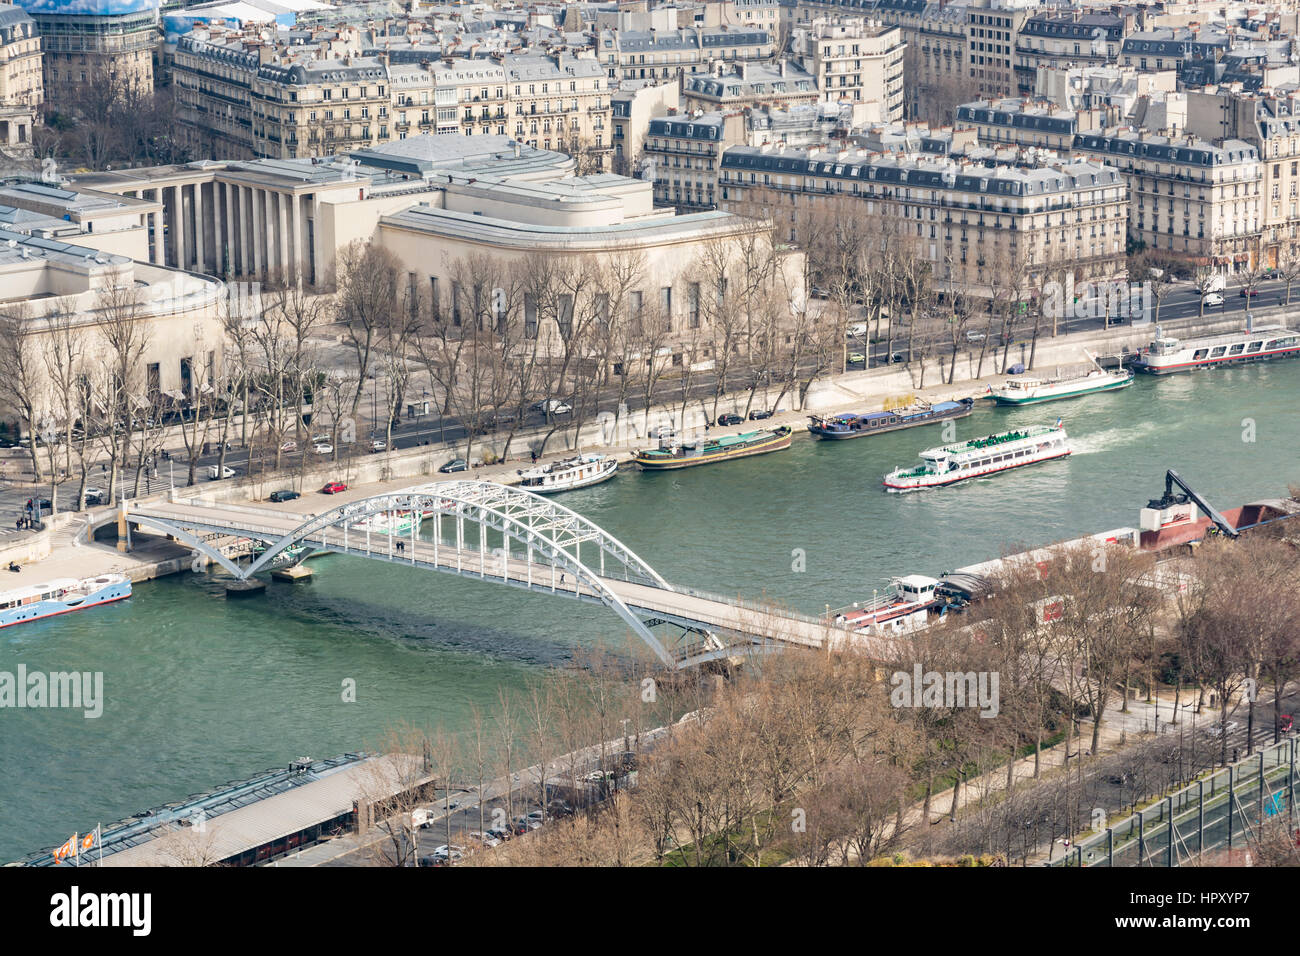 Banks of the river seine viewed from Eiffel Tower, UNESCO world heritage site, Ile-de-France, Paris, France Stock Photo